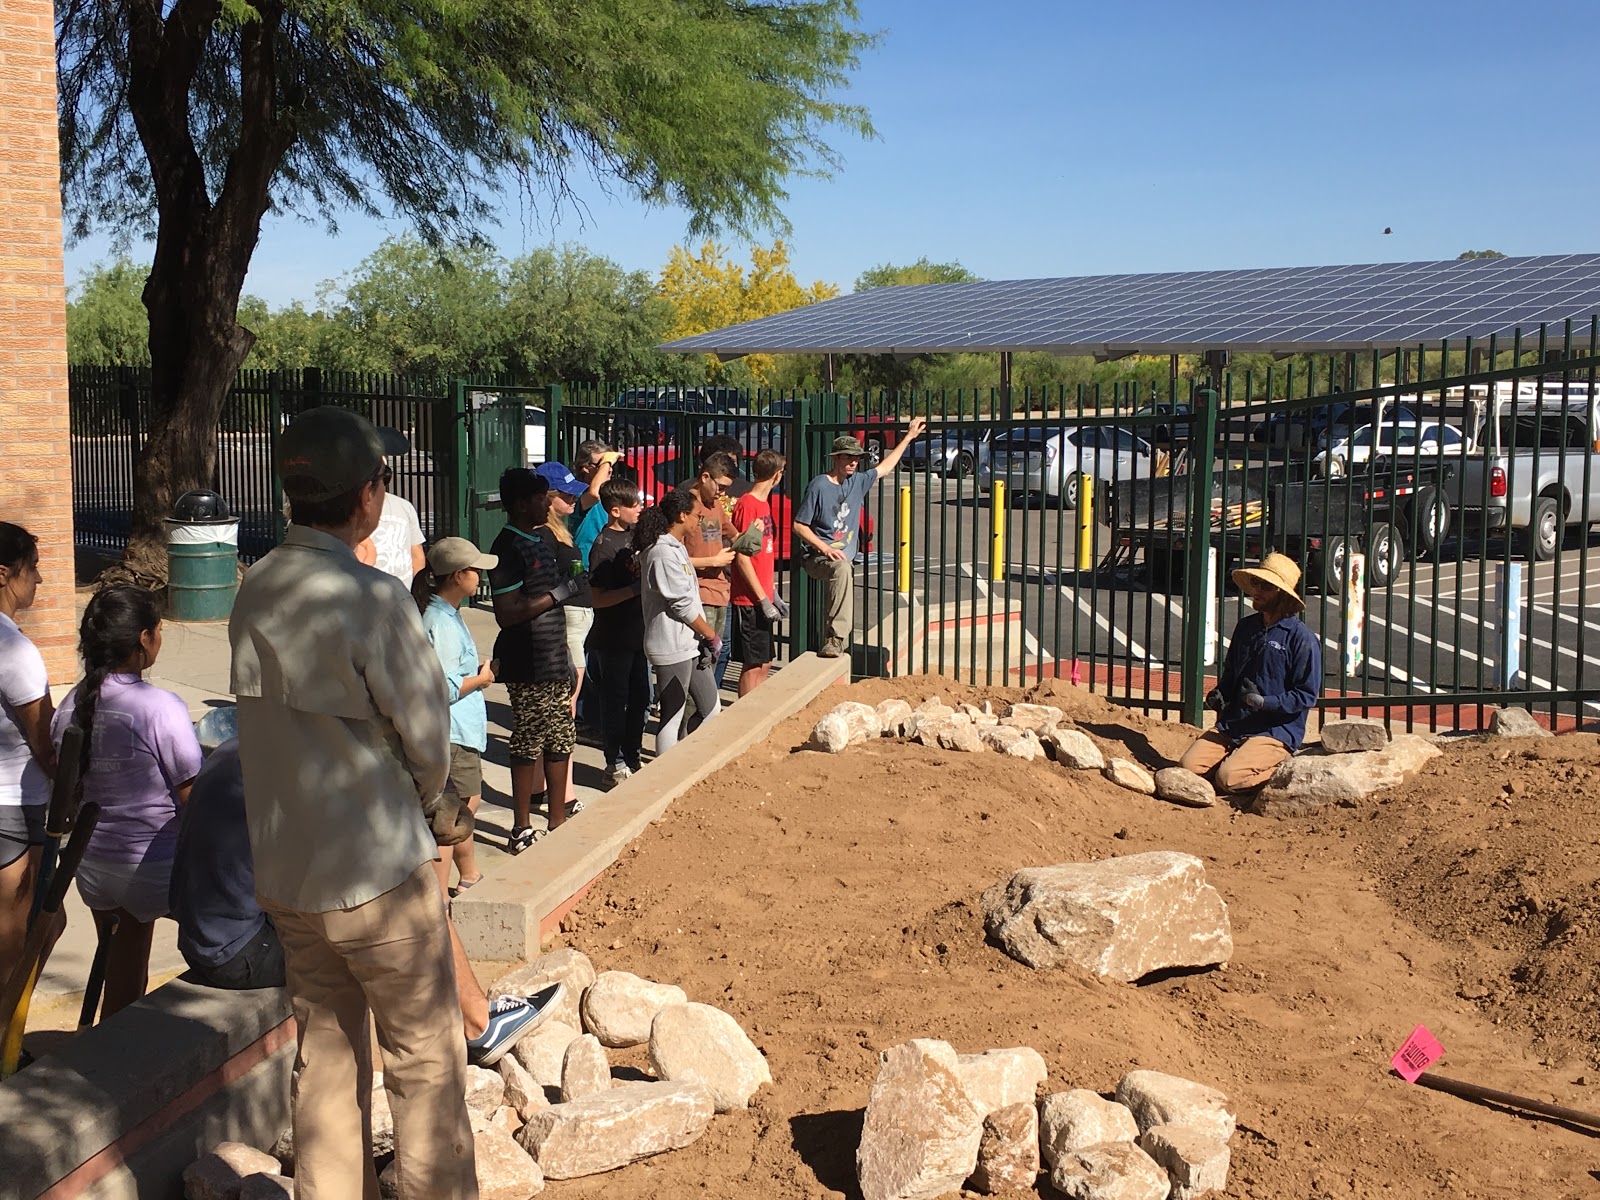 On a warm morning in May 2019, a group of volunteers gathered at Canyon del Oro High School to install a rainwater garden. This is one example of 8 similar projects at Tucson-area schools where students have developed rainwater garden plans, with assistance from staff from Arizona Project WET and Watershed Management Group.